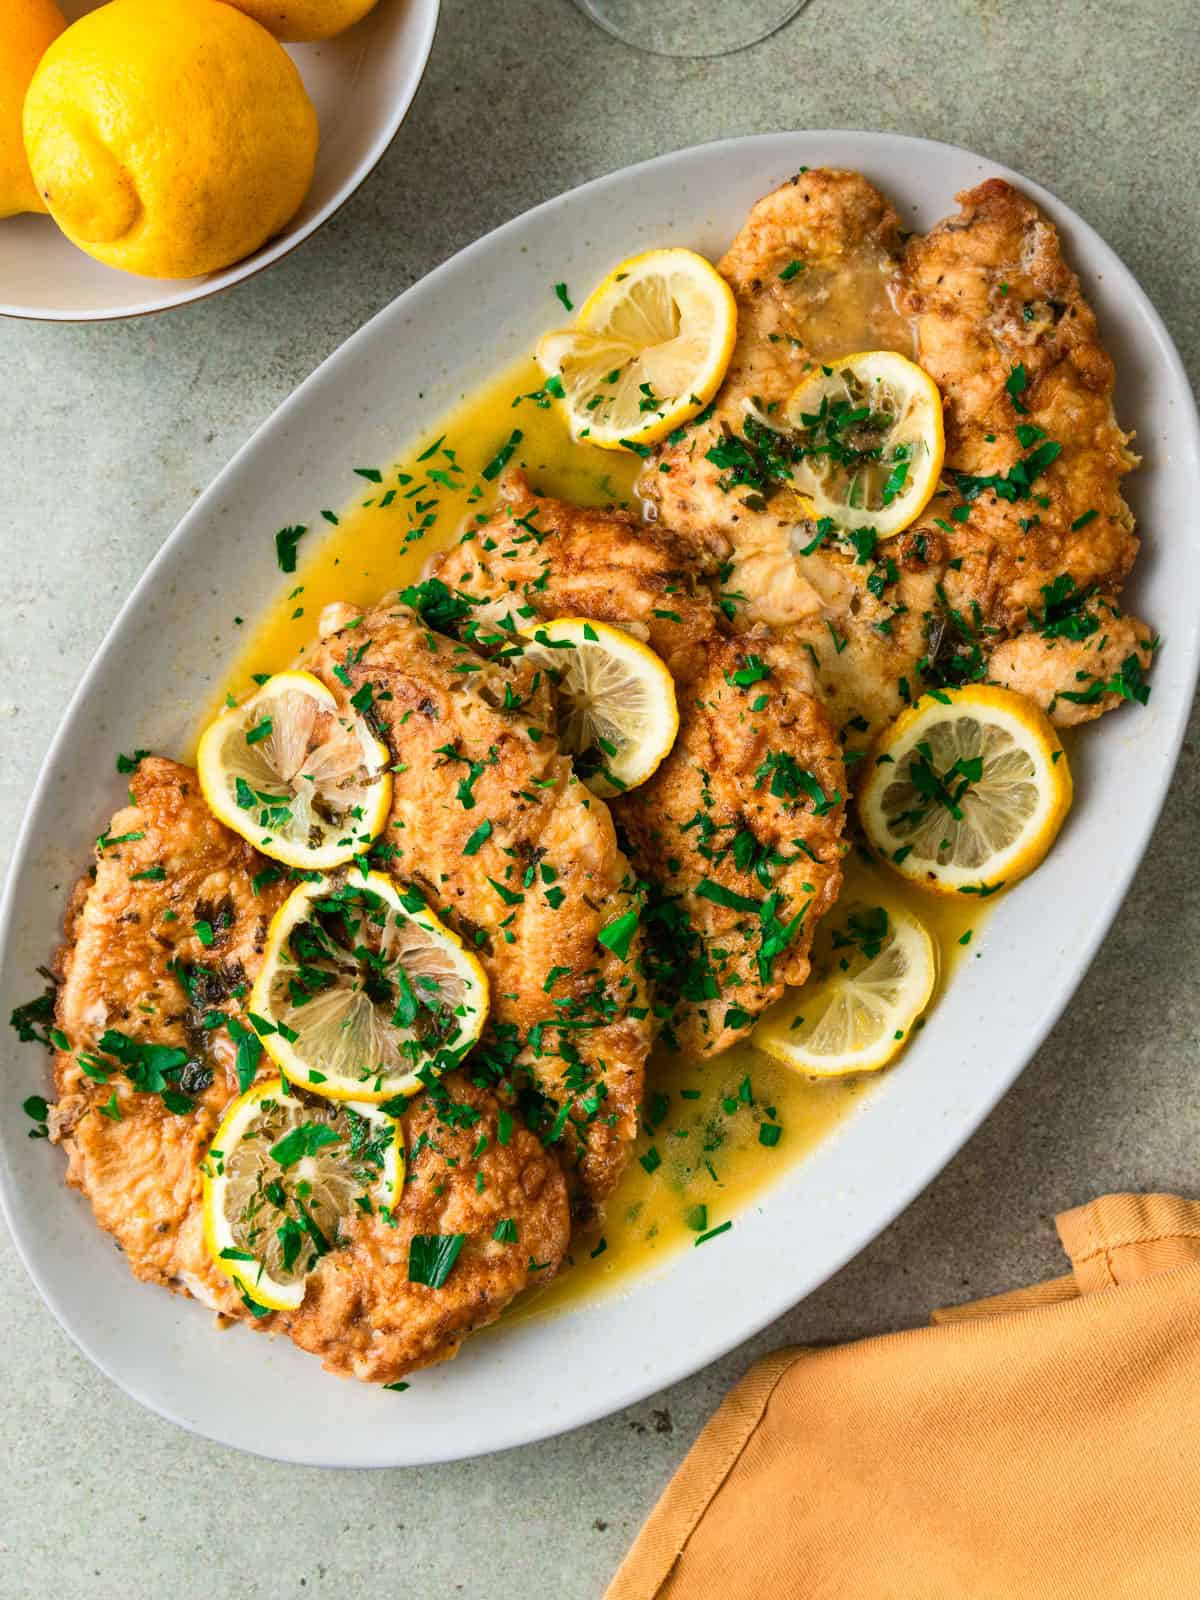 Lemony chicken francaise recipe with tender chicken cutlets coated in a buttery white wine sauce.